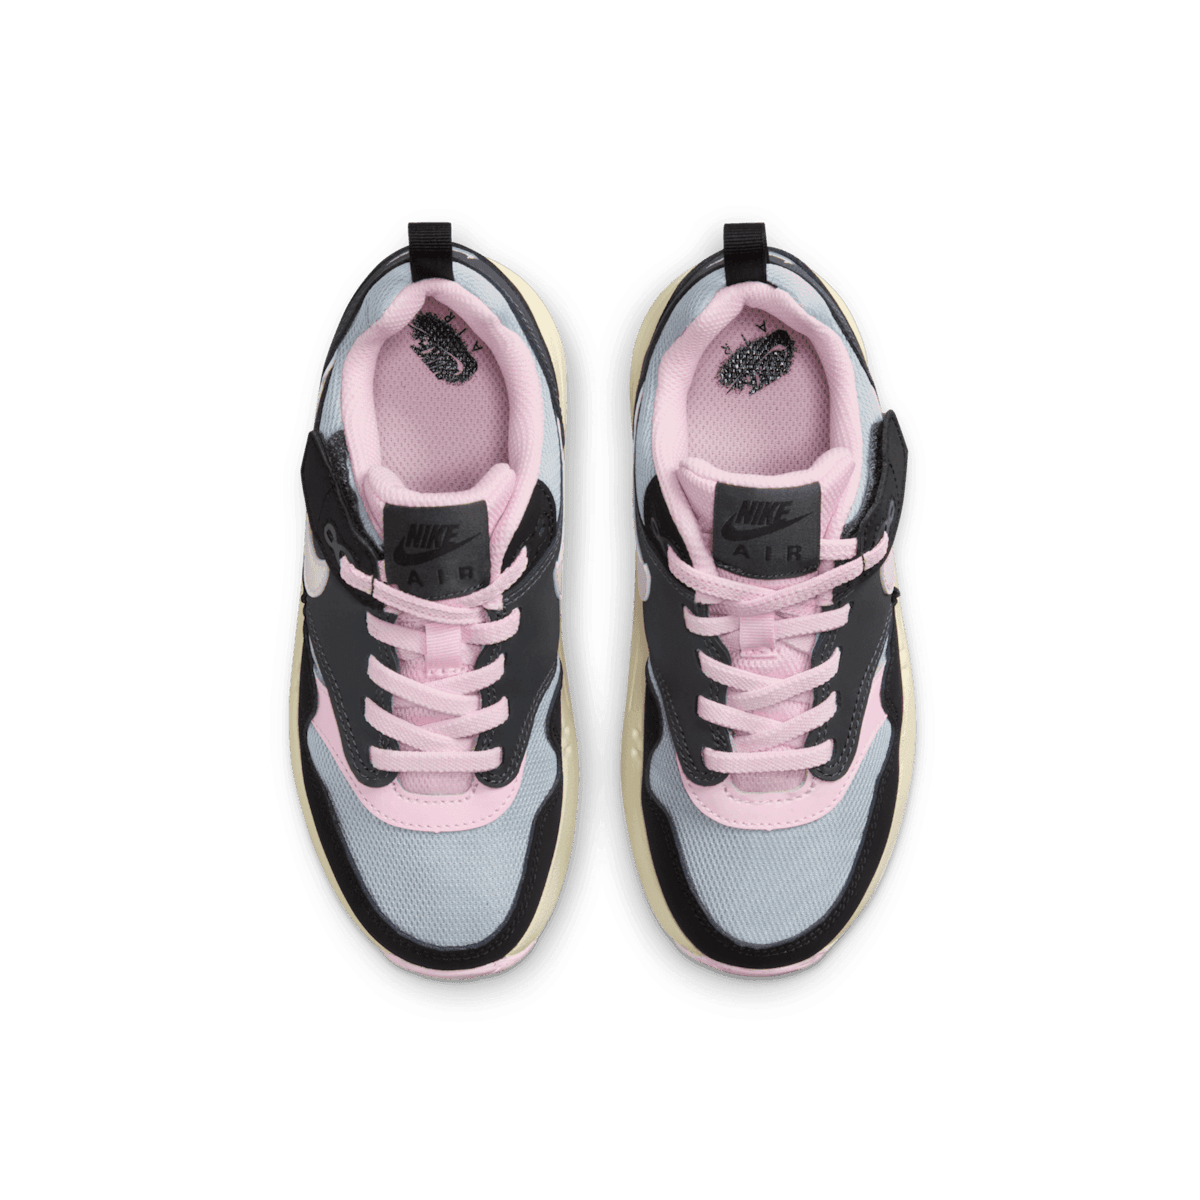 Nike Air Max 1 Black Anthracite Pink Foam (PS) Angle 1